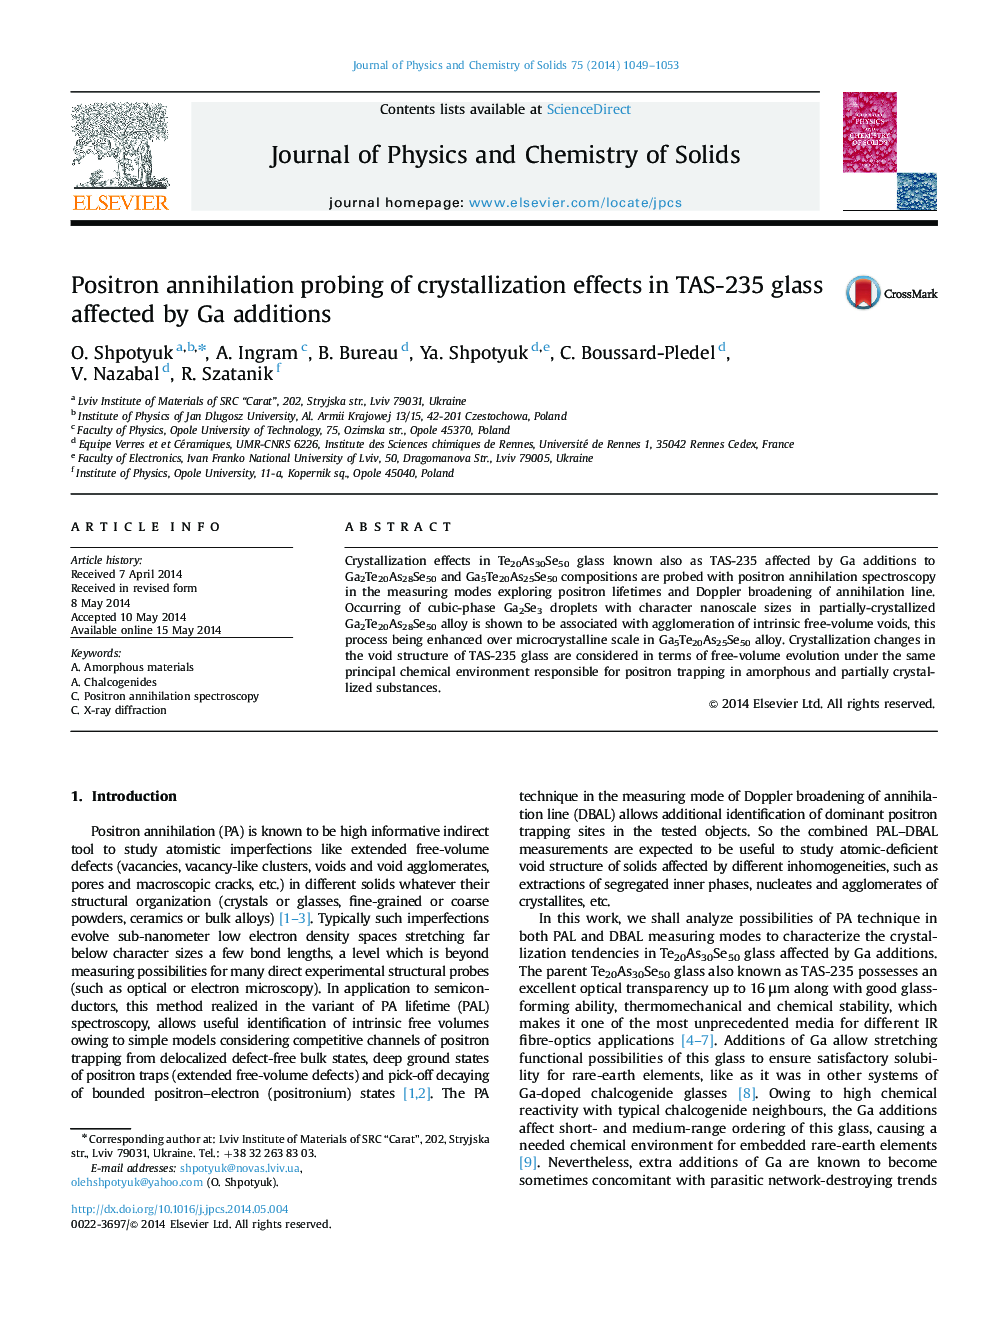 Positron annihilation probing of crystallization effects in TAS-235 glass affected by Ga additions